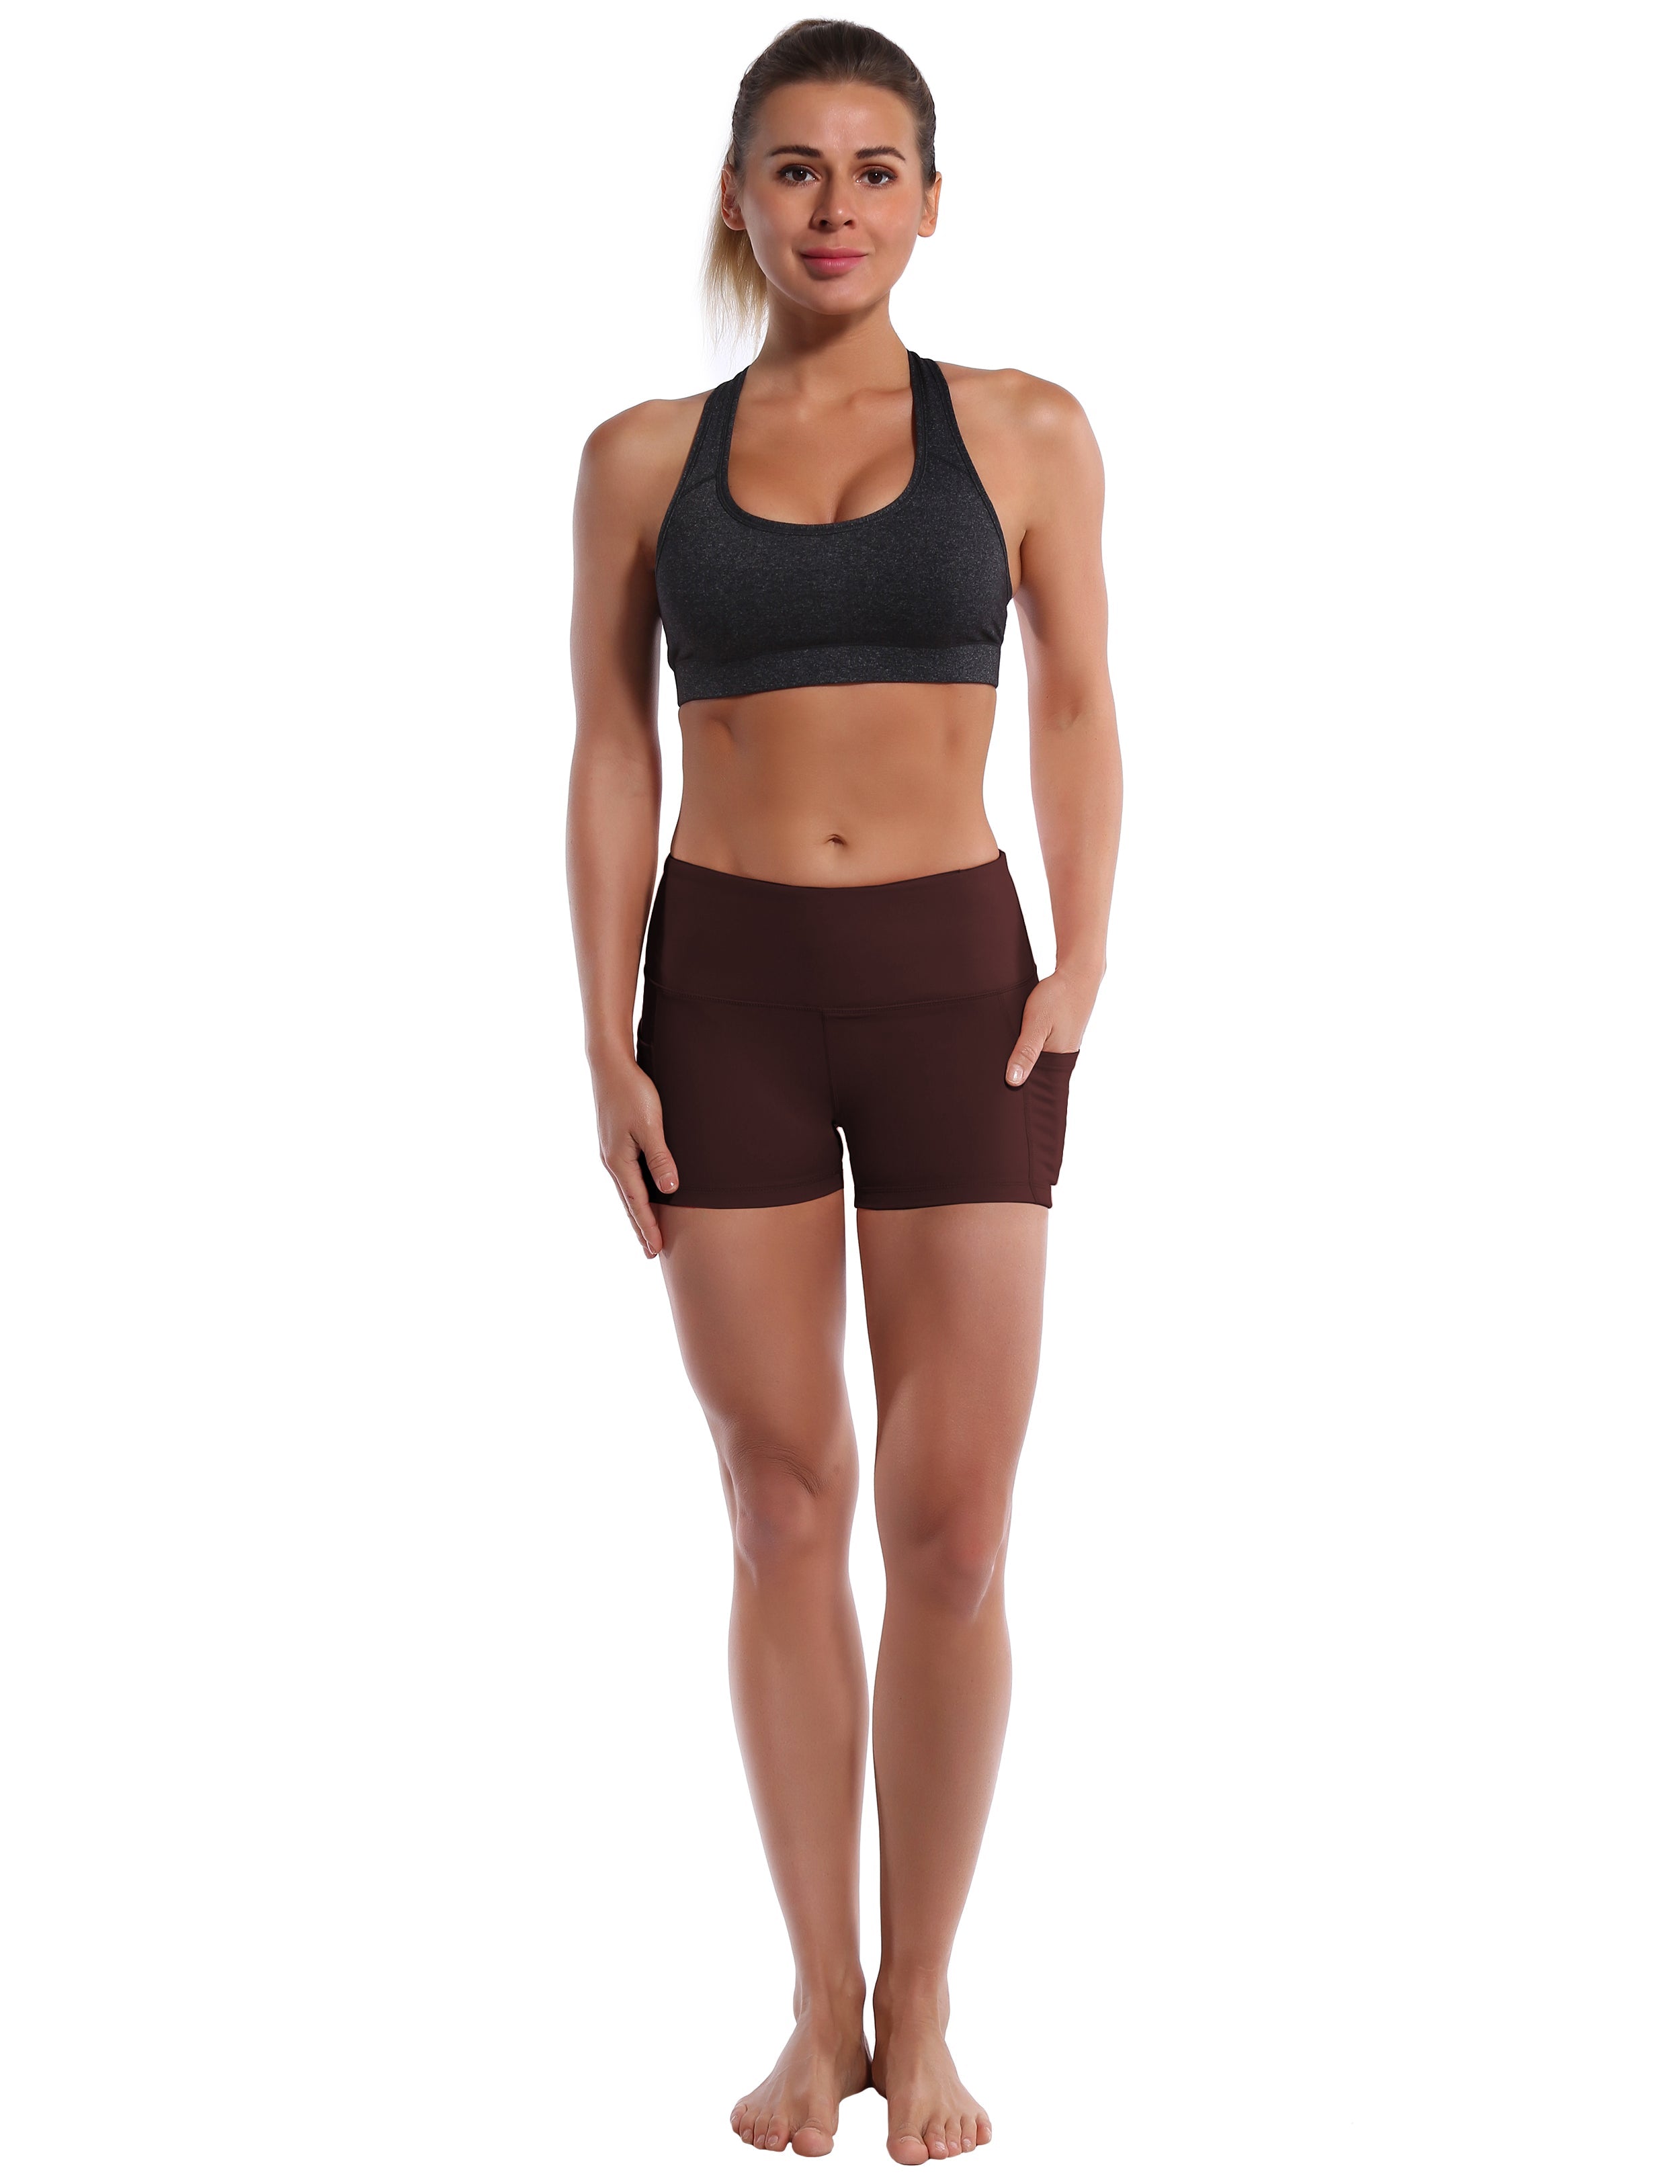 2.5" Side Pockets Biking Shorts mahoganymaroon Sleek, soft, smooth and totally comfortable: our newest sexy style is here. Softest-ever fabric High elasticity High density 4-way stretch Fabric doesn't attract lint easily No see-through Moisture-wicking Machine wash 78% Polyester, 22% Spandex